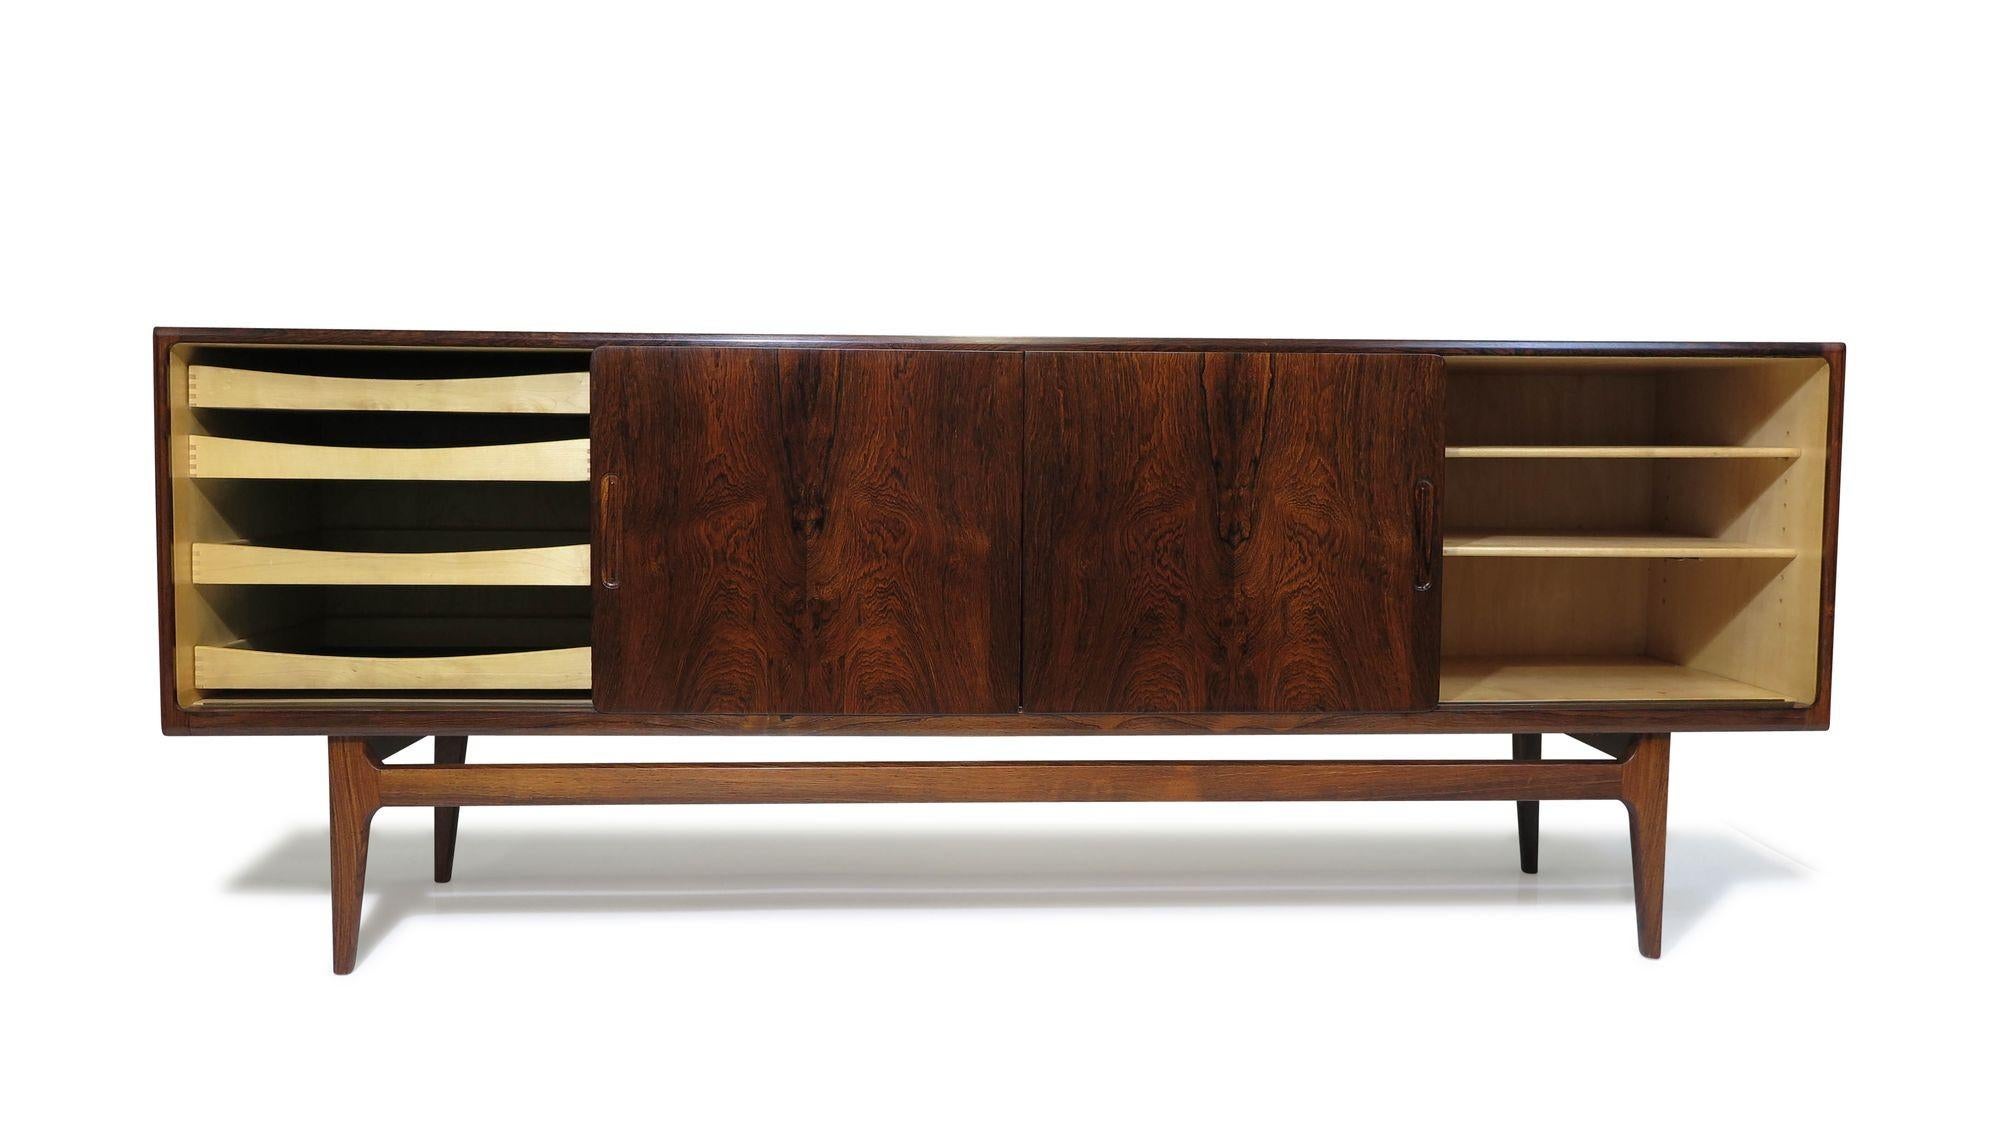 This Danish Credenza, designed and handcrafted in Denmark, 1952, is expertly handcrafted from Brazilian rosewood, showcasing exquisite joinery and the timeless sophistication of Danish furniture design. Its four sliding doors featuring book-matched